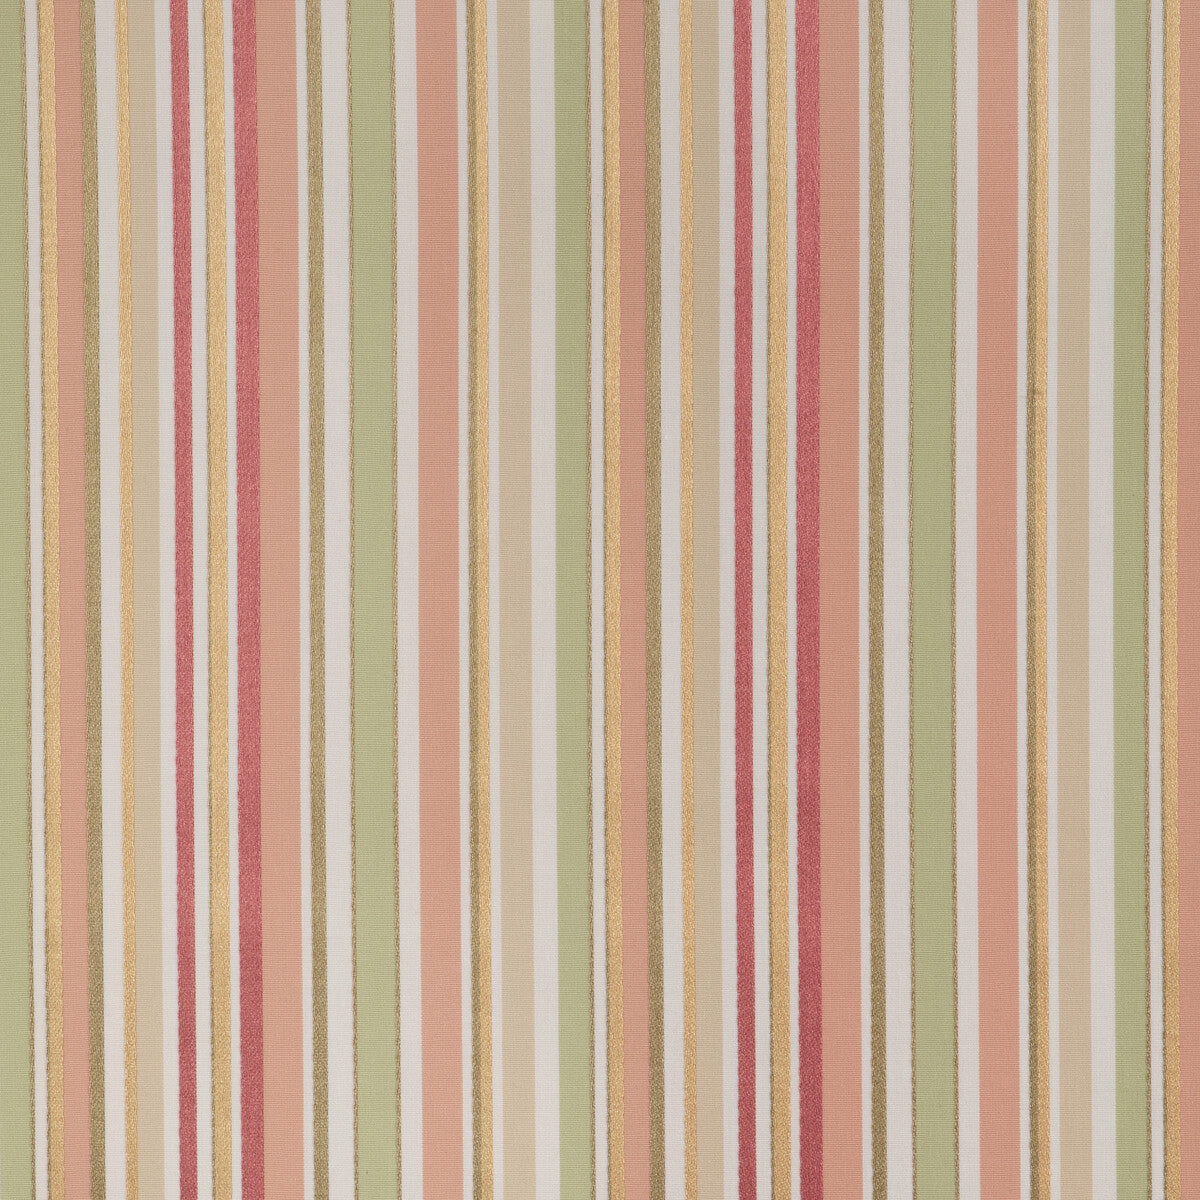 Siders Stripe fabric in blush/sage color - pattern 2023103.73.0 - by Lee Jofa in the Highfield Stripes And Plaids collection